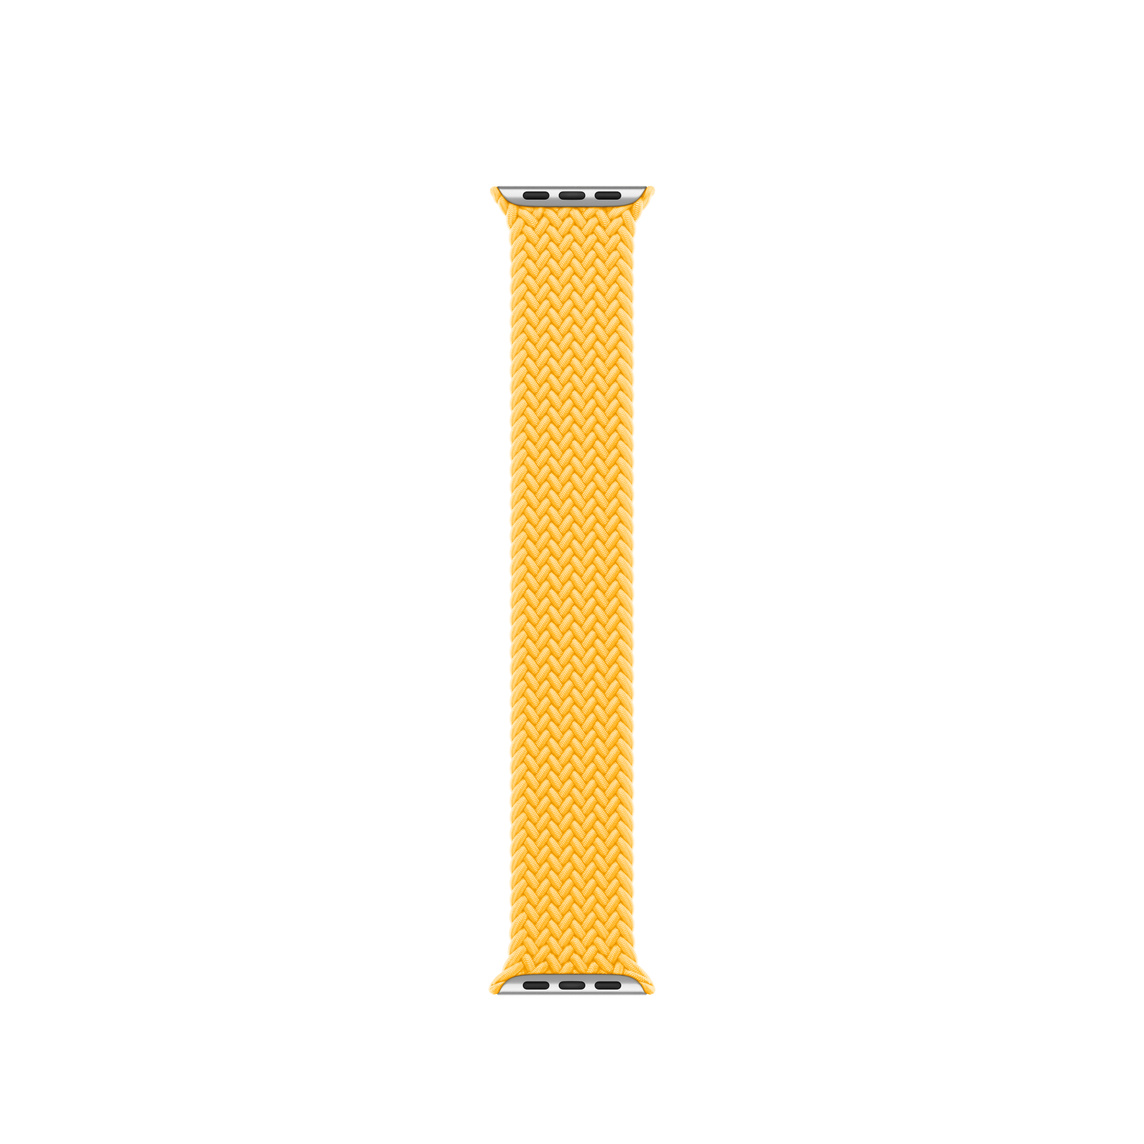 Sunshine Braided Solo Loop band, woven polyester and silicone threads with no clasps or buckles